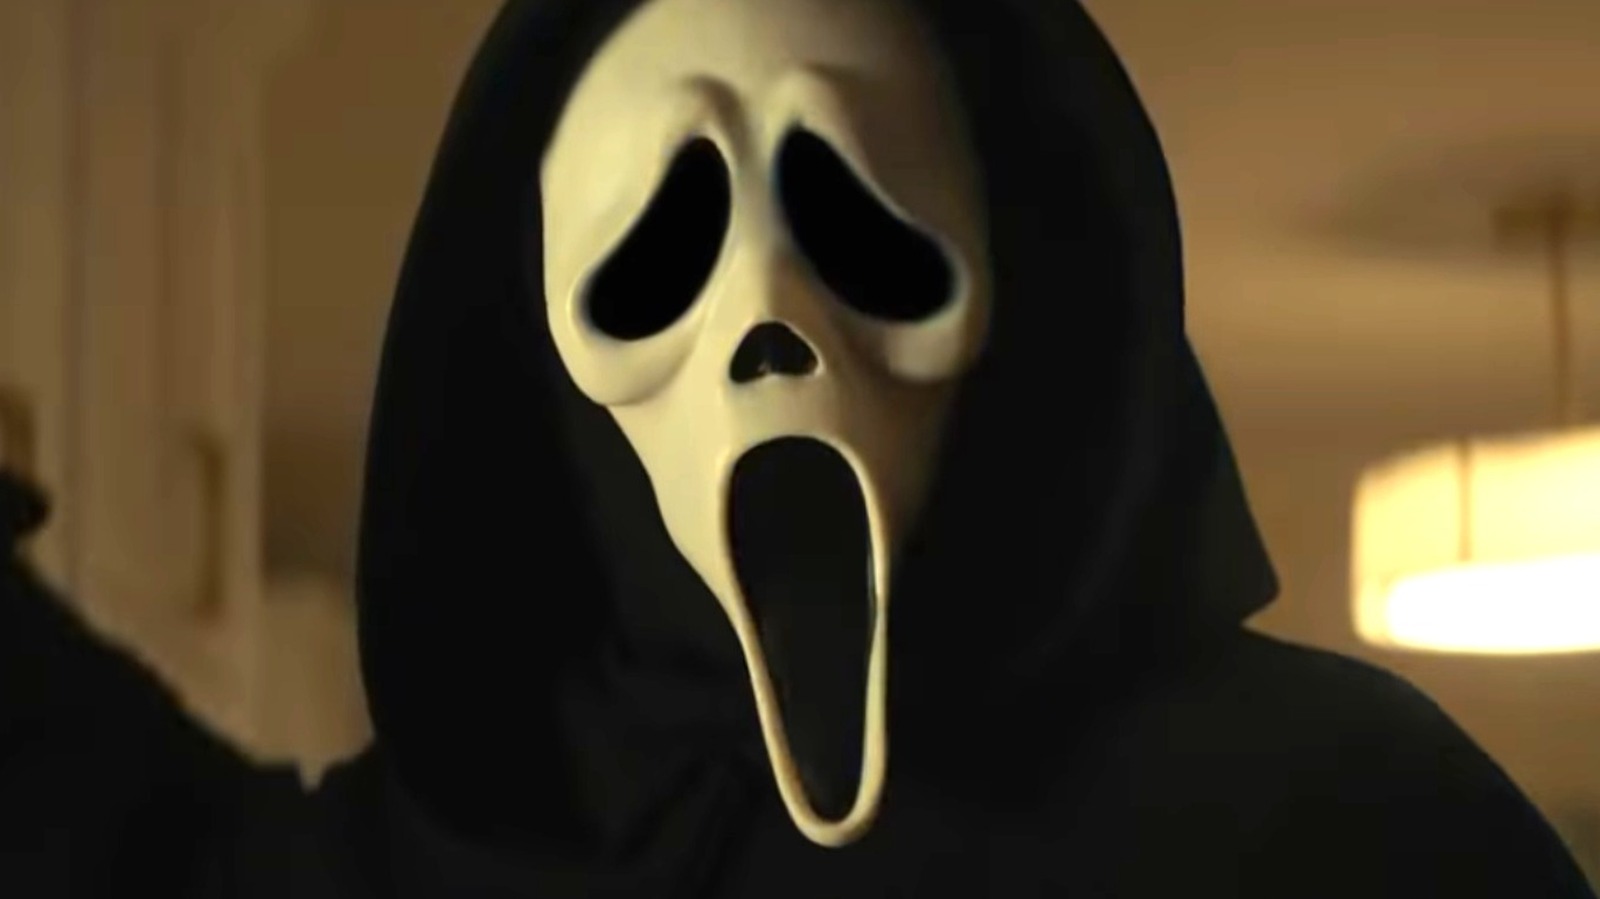 Scream 6 Will Be The Bloodiest One Yet